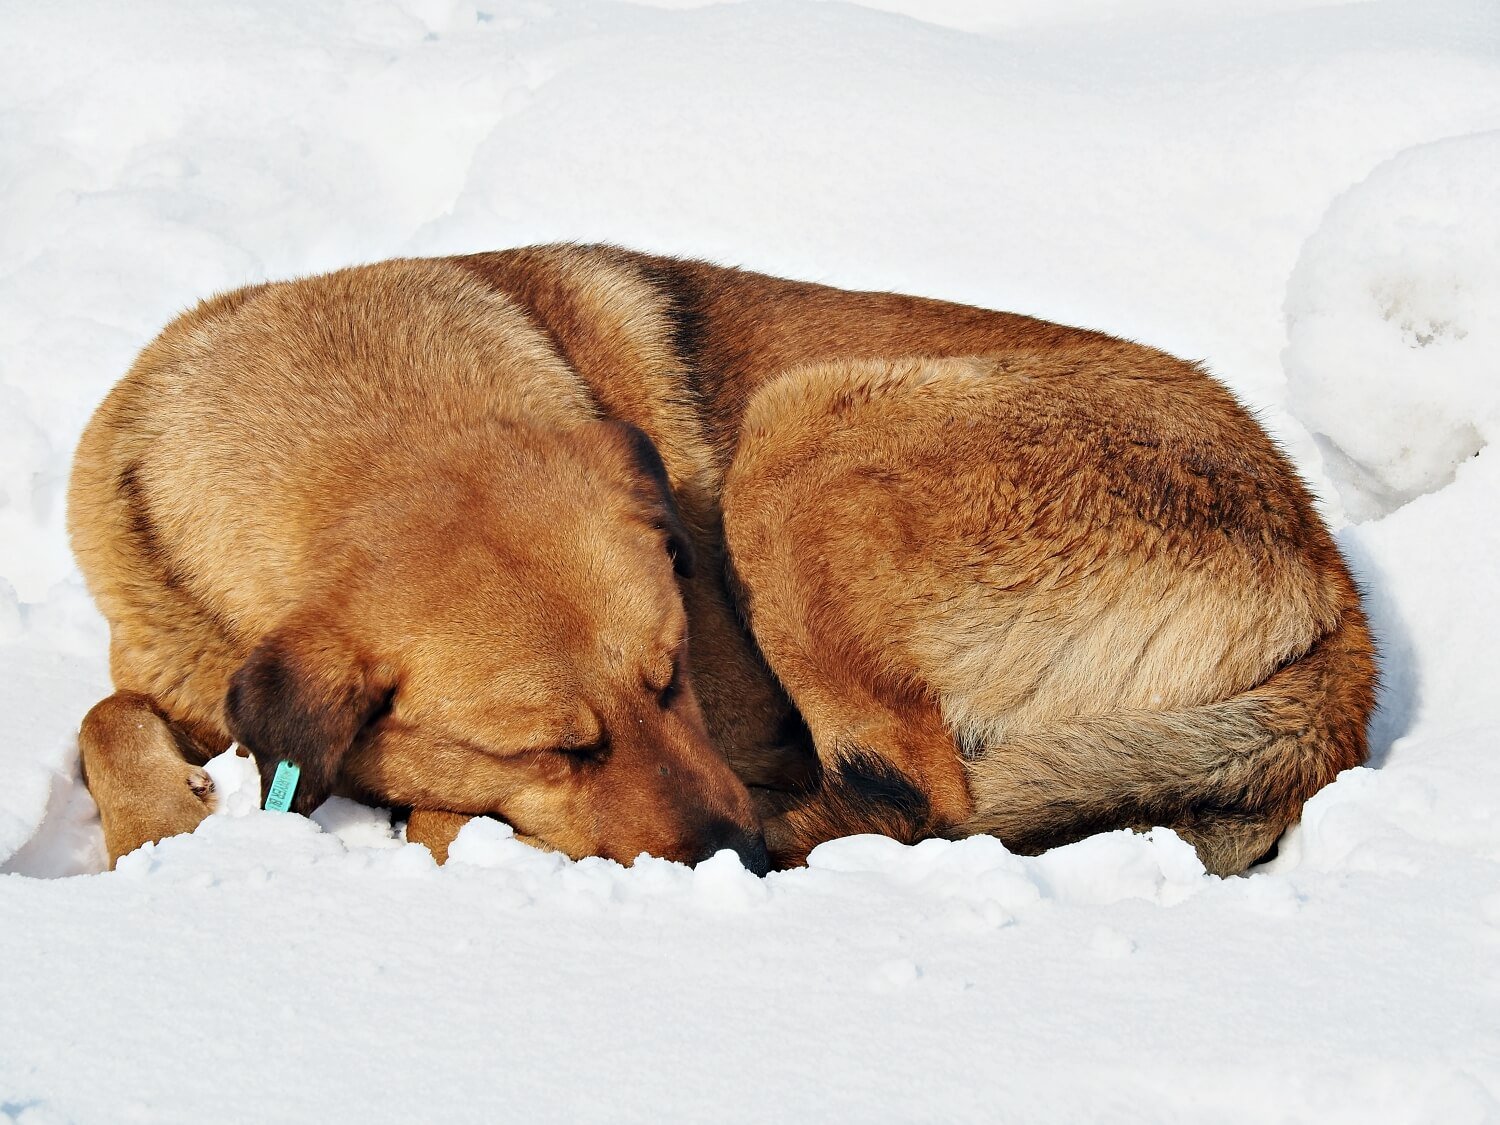 Istanbul December Weather, a dog asleep in the snow